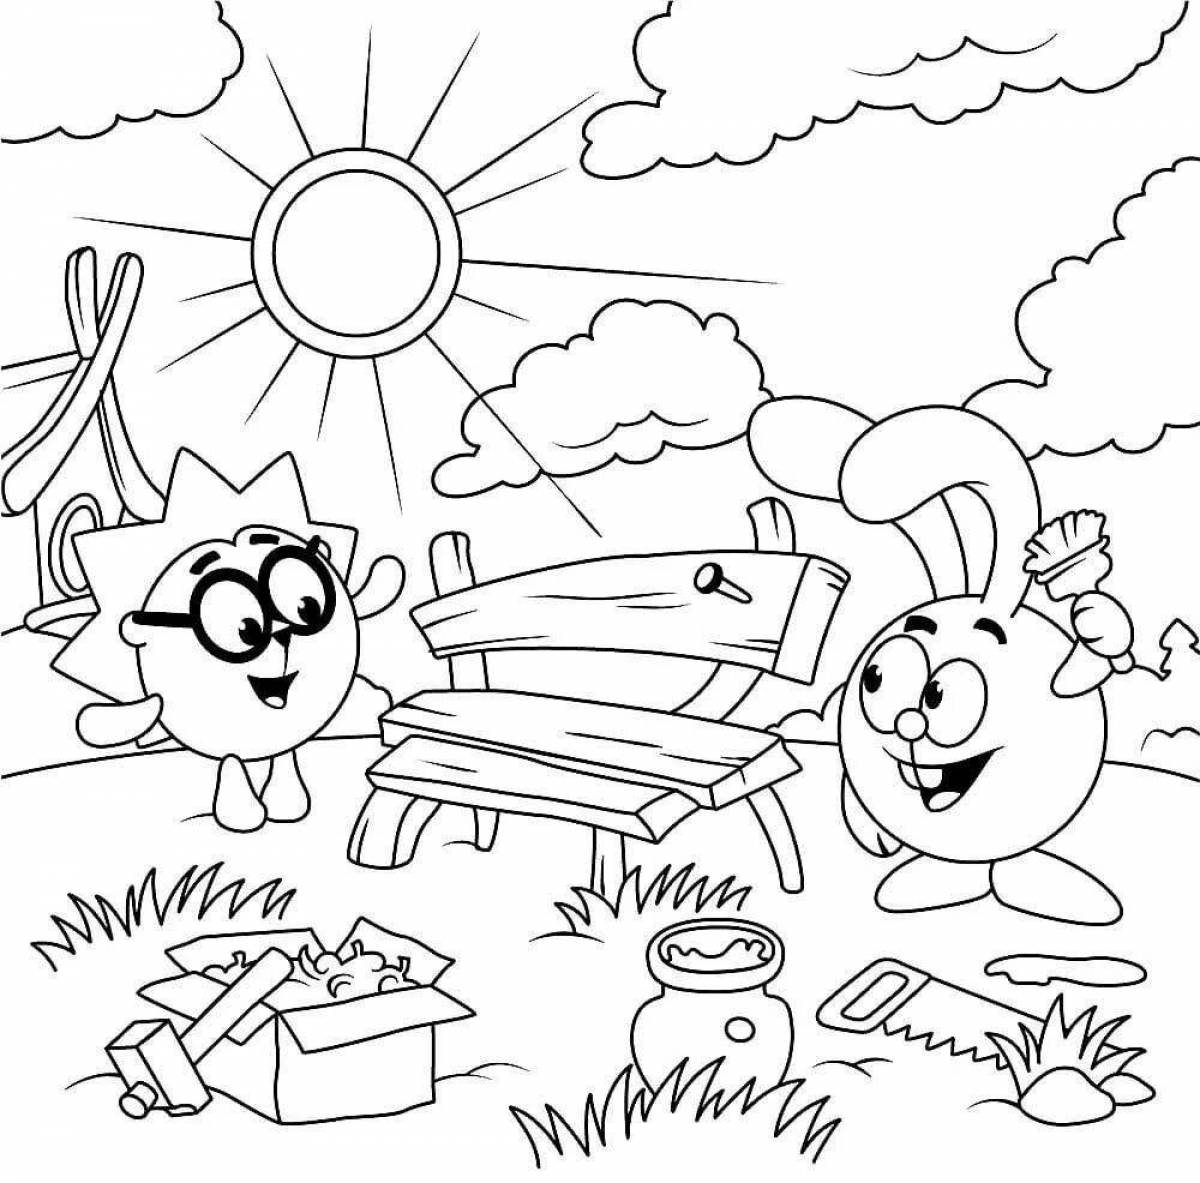 Funny children's coloring